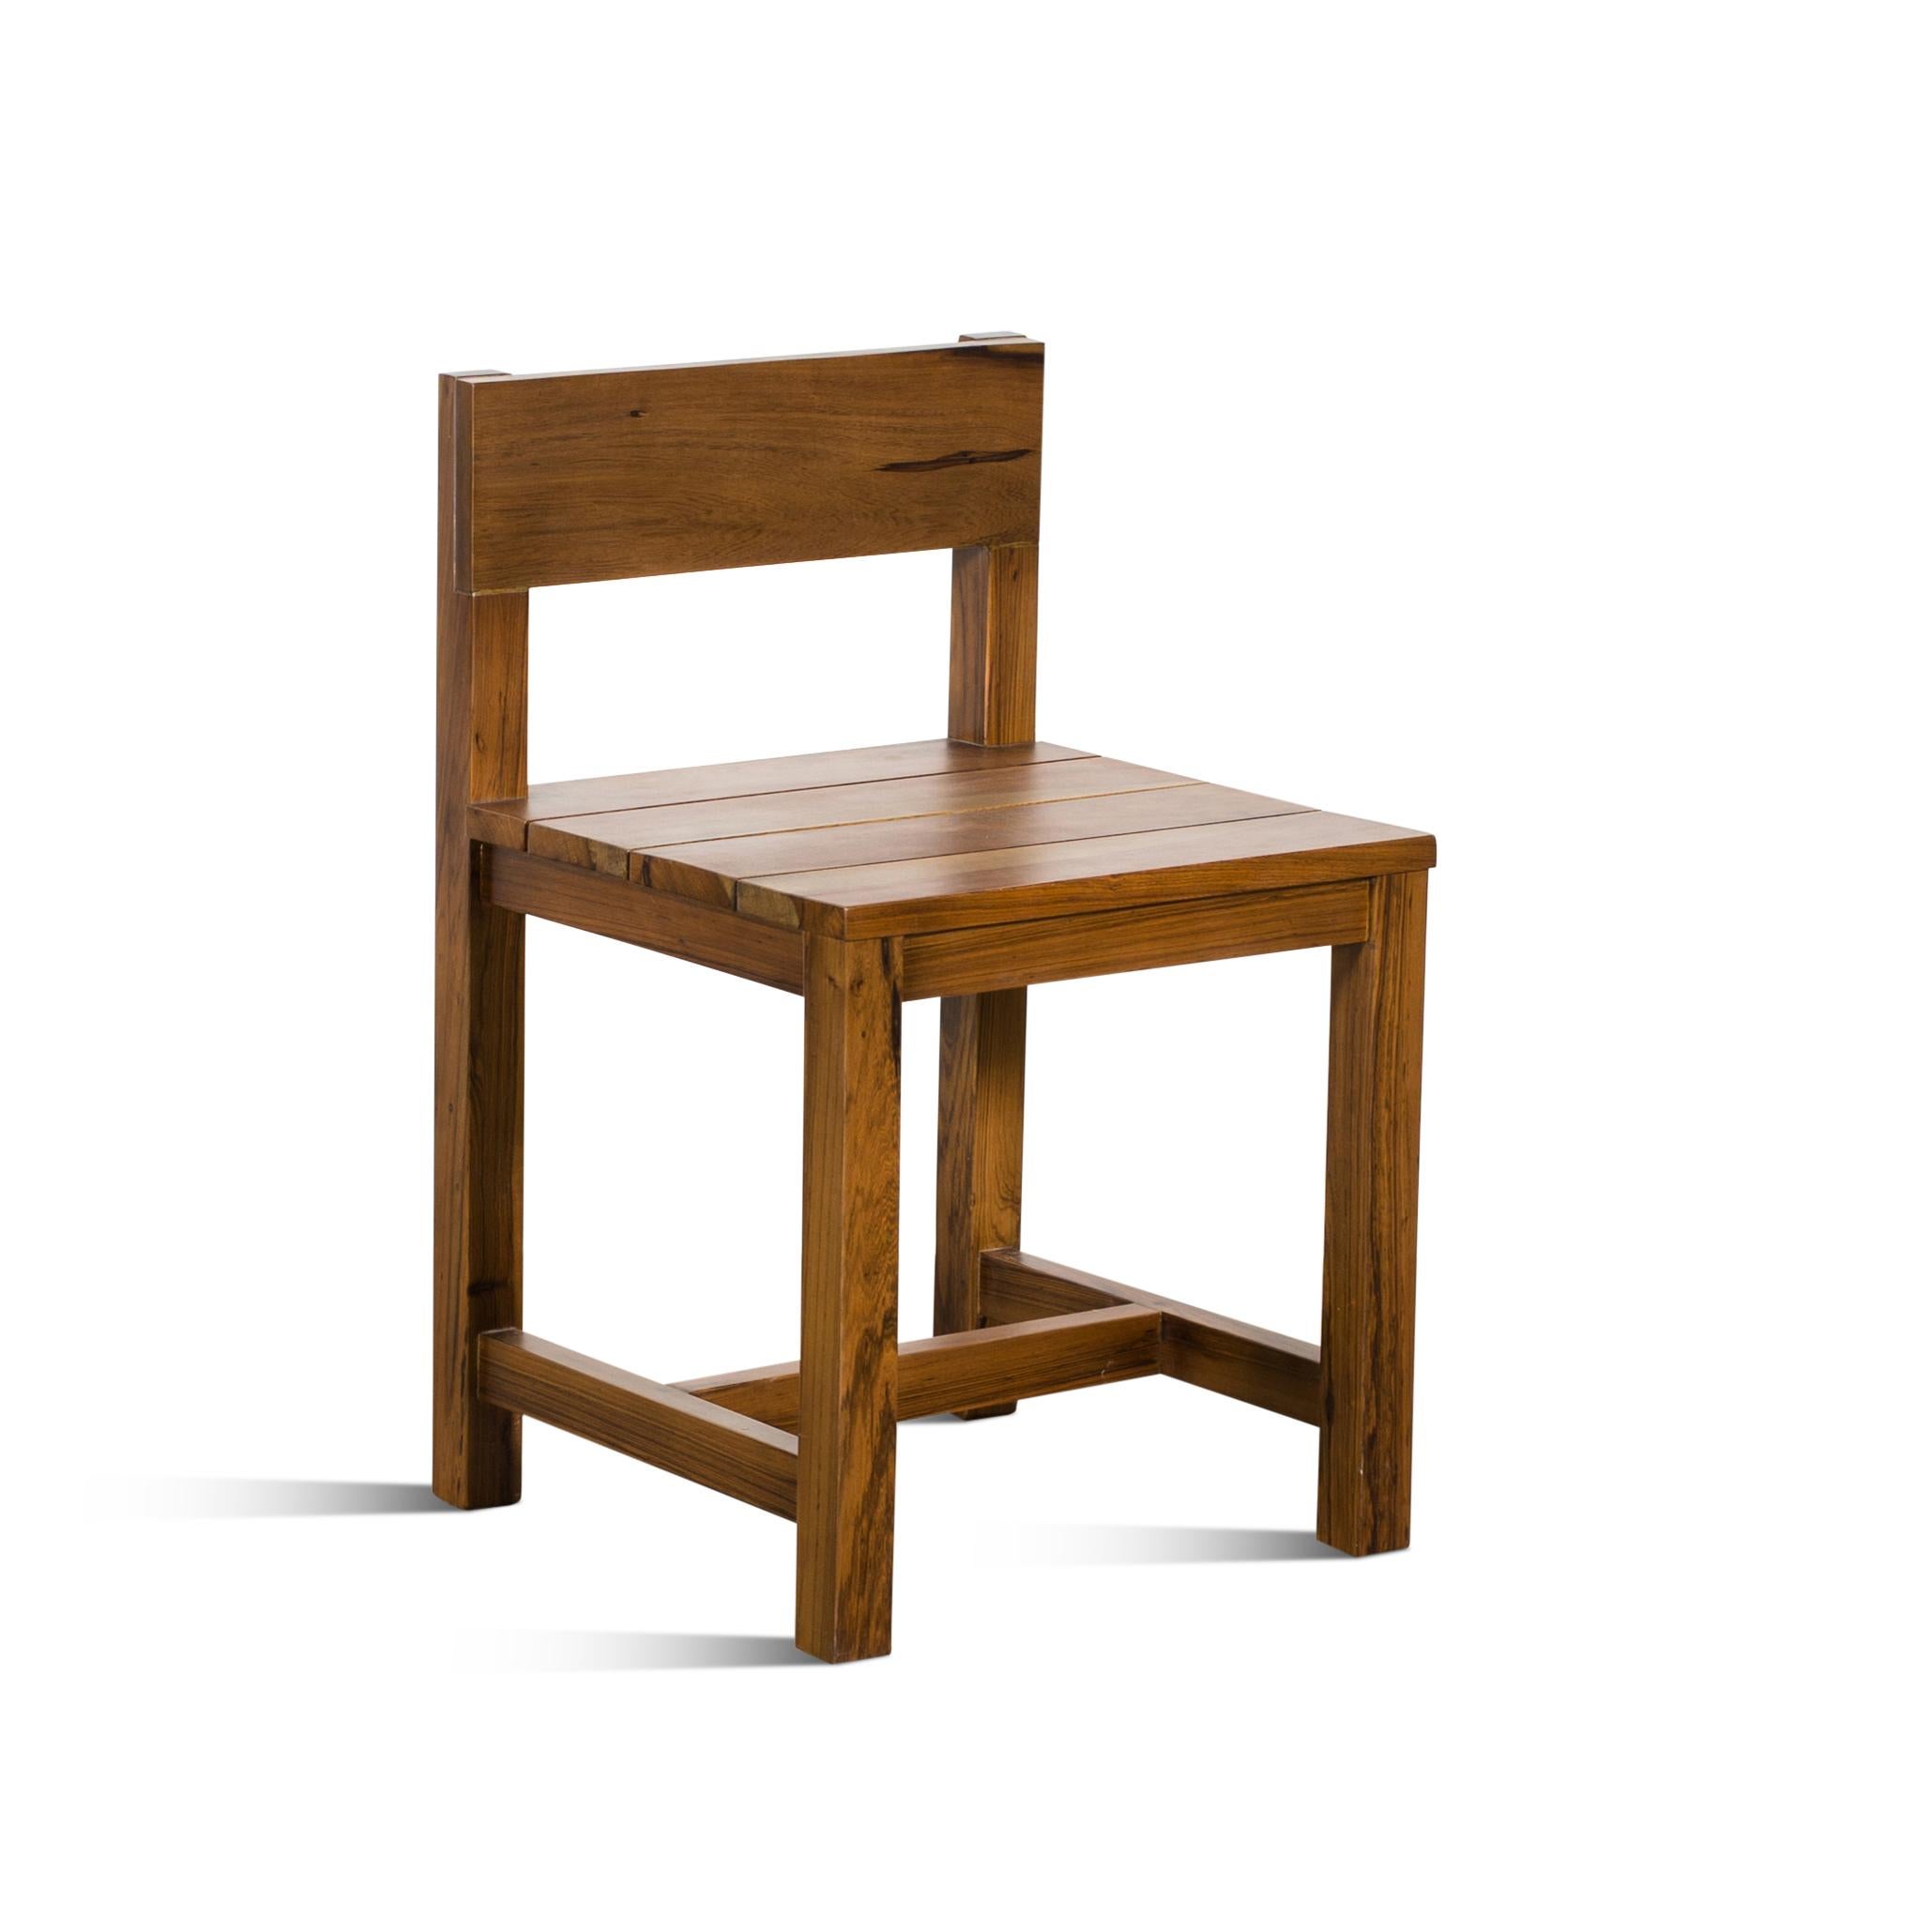 This rectilinear solid wood accent or dining chair is an original work by Costantini and inspired by the work of artists like Donald Judd. Available in any wood or finish and for indoor and outdoor use.

Measurements are: 18